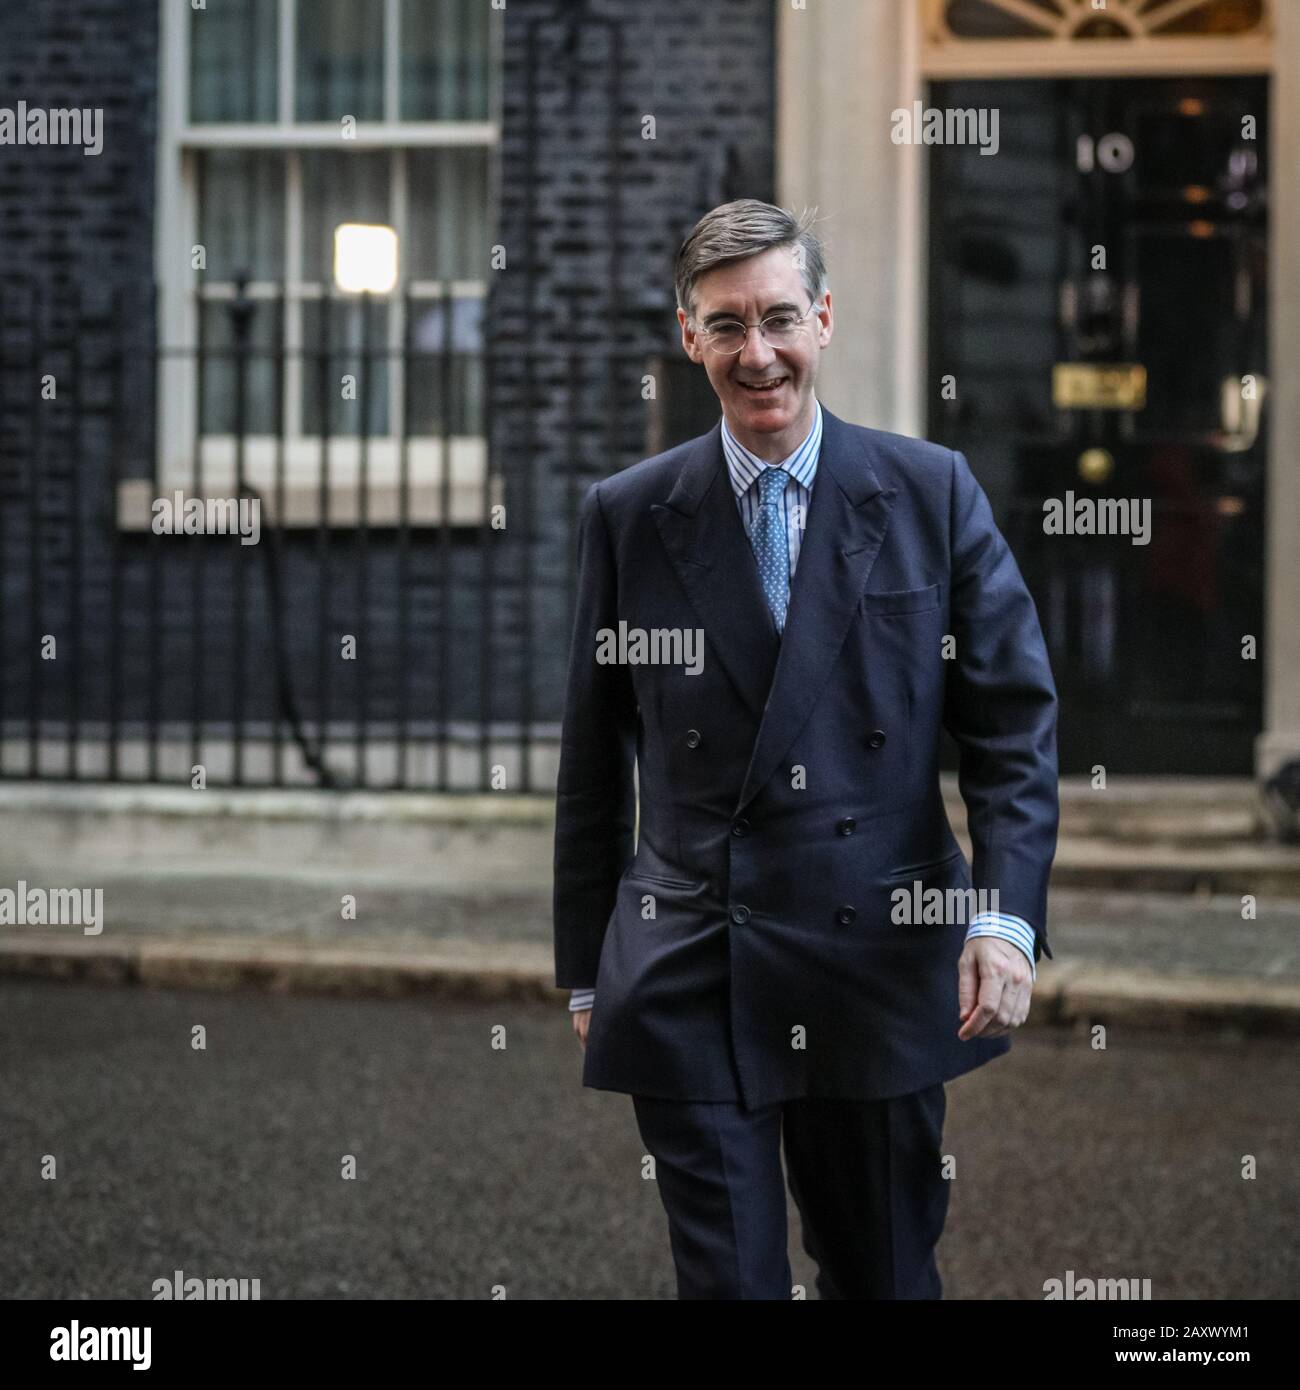 Downing Street, London, 13th Feb 2020. Jacob Rees-Mogg remains in his position as Leader of the House of Commons in the Cabinet re-shuffle. Credit: Imageplotter/Alamy Live News Stock Photo